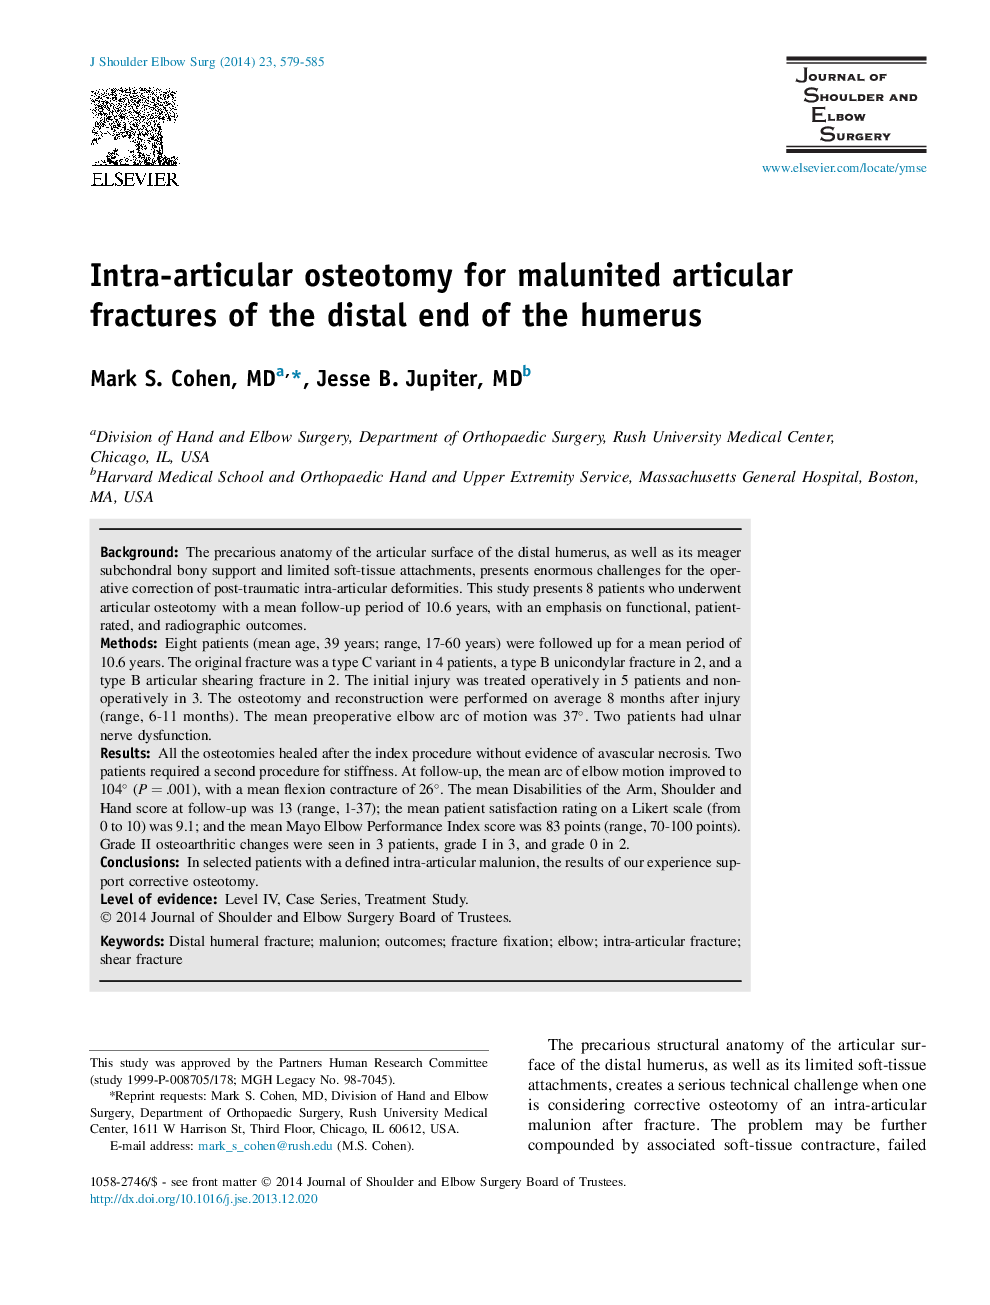 Intra-articular osteotomy for malunited articular fractures of the distal end of the humerus